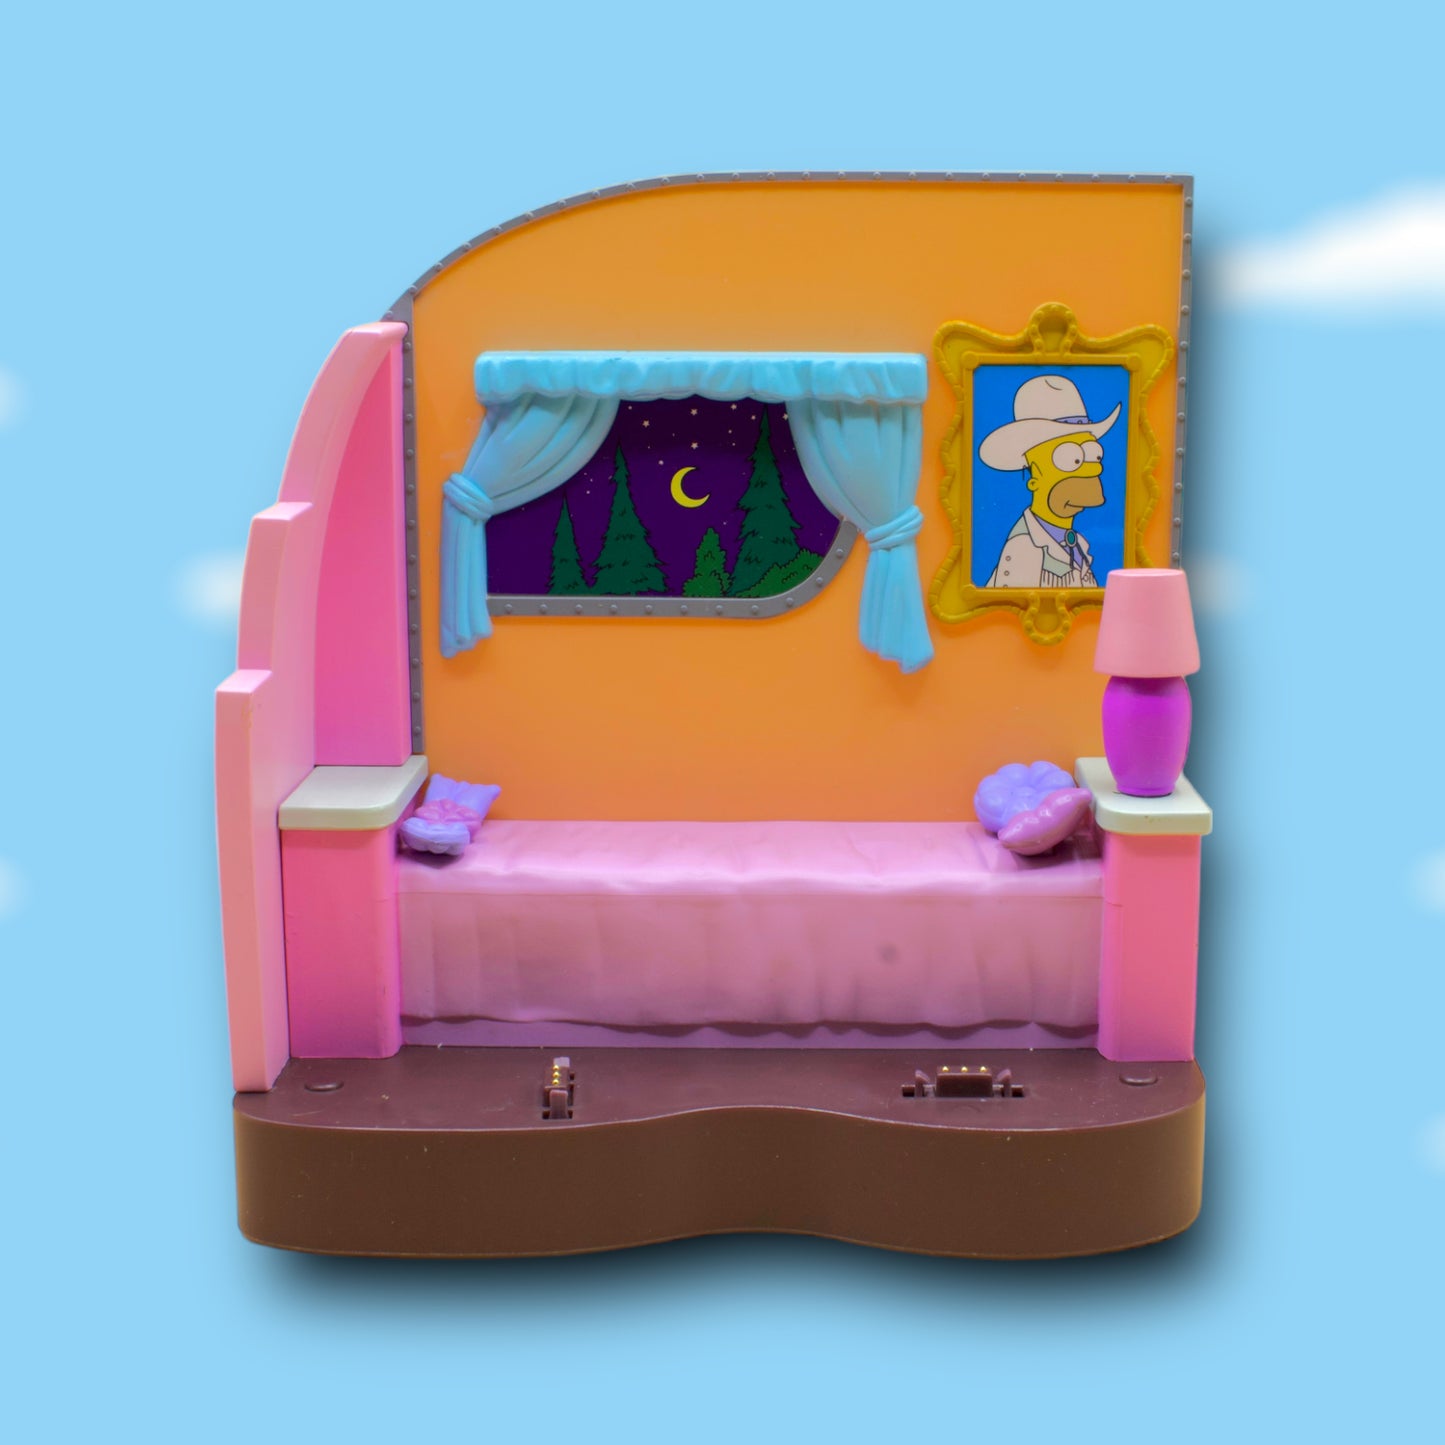 The World of Springfield Toys R Us Exclusive Playset - Lurleen Lumpkin's Trailer (Playmates, 2002)